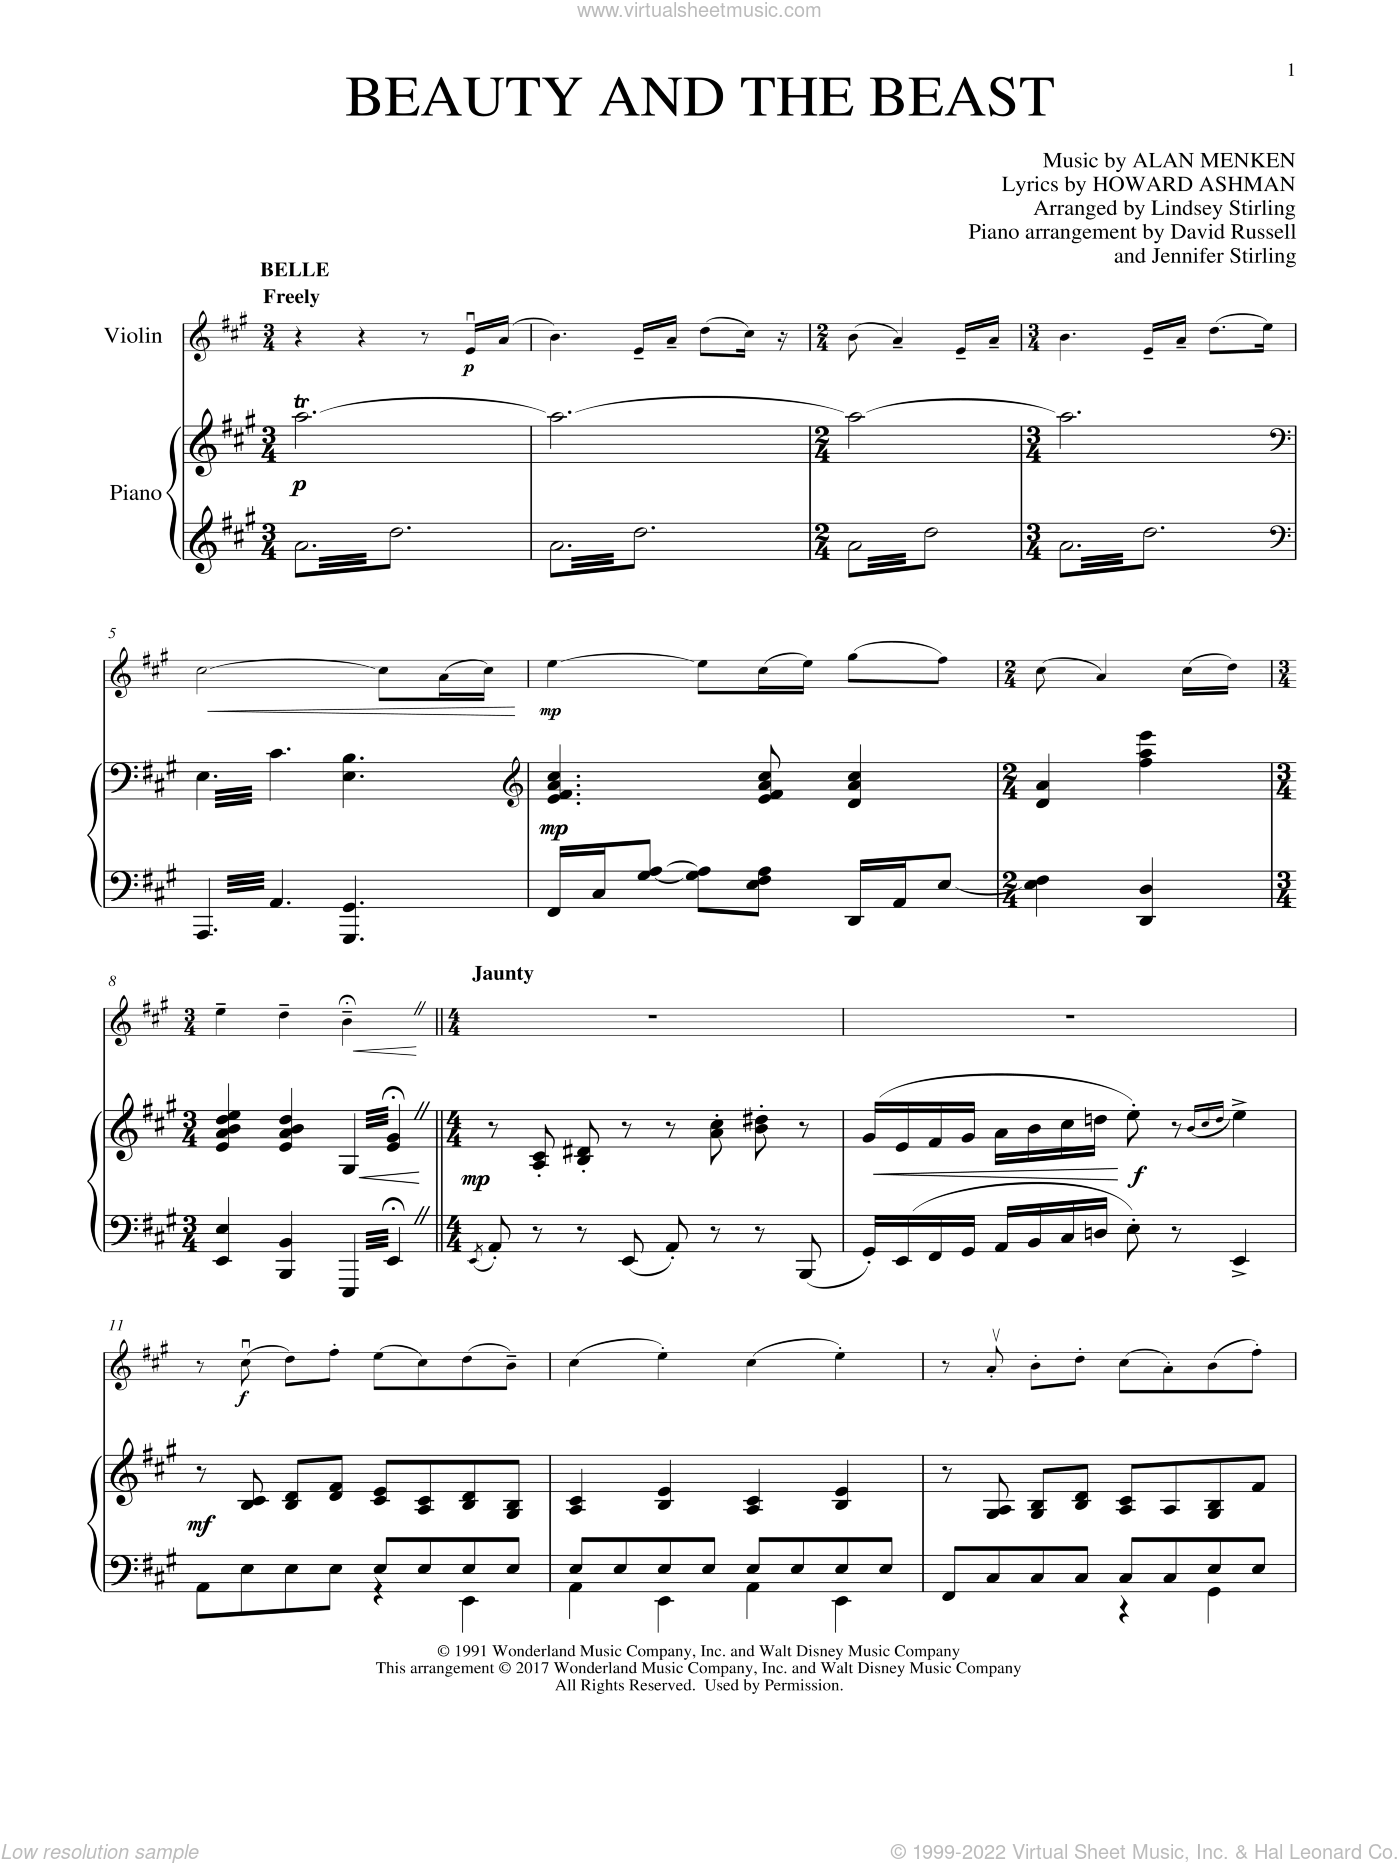 Menken Beauty And The Beast Medley Sheet Music For Violin And Piano